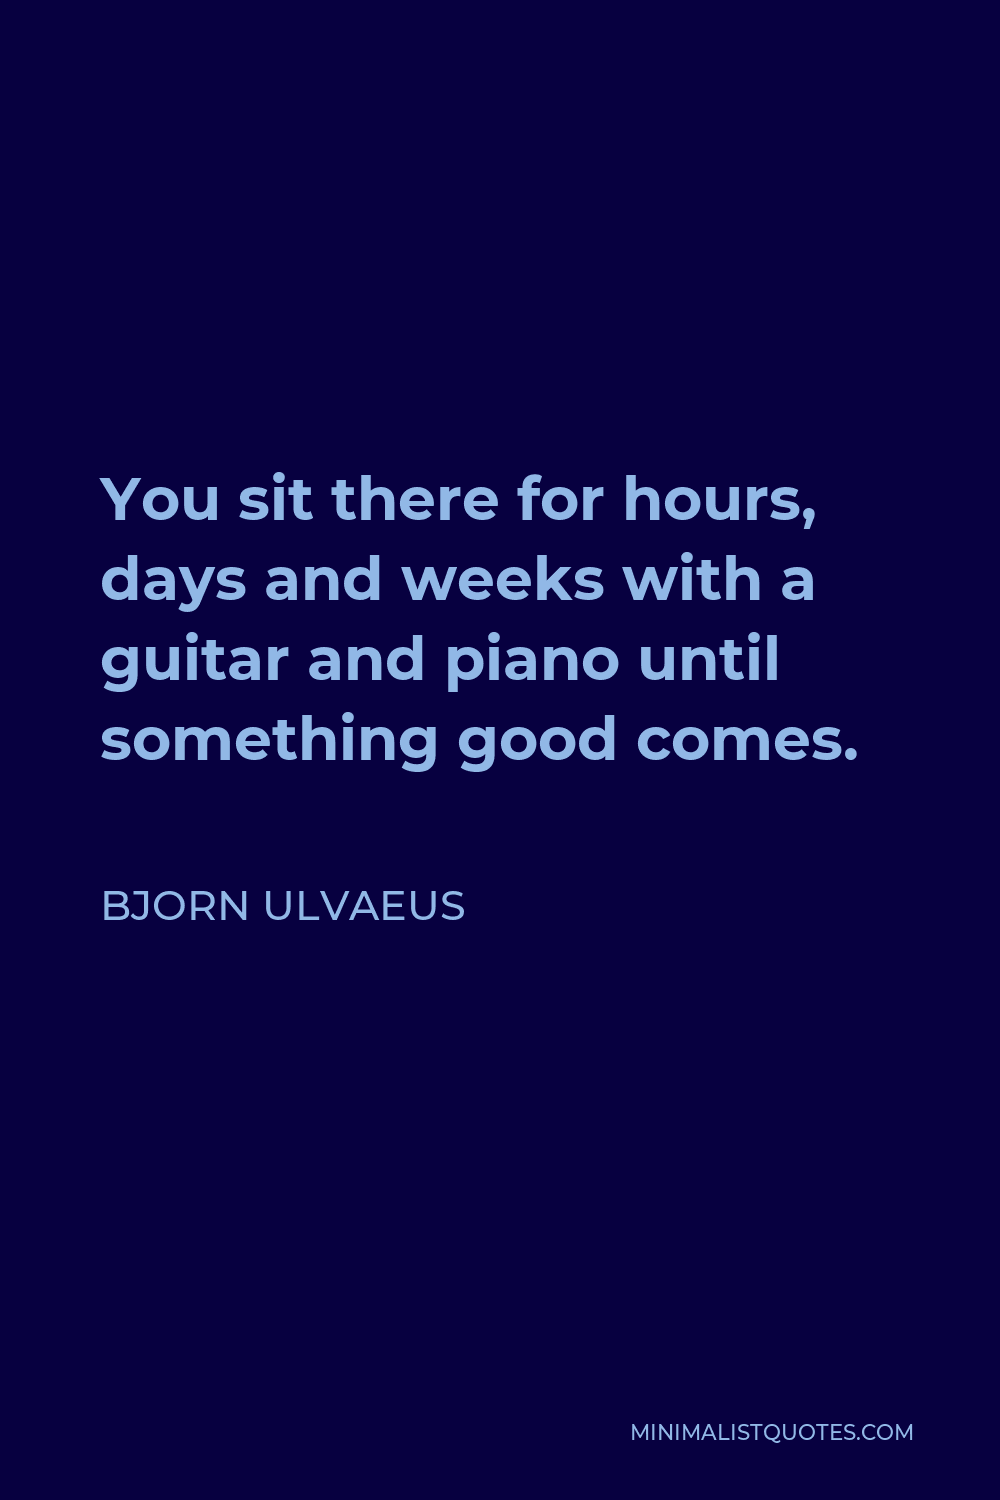 Bjorn Ulvaeus Quote - You sit there for hours, days and weeks with a guitar and piano until something good comes.